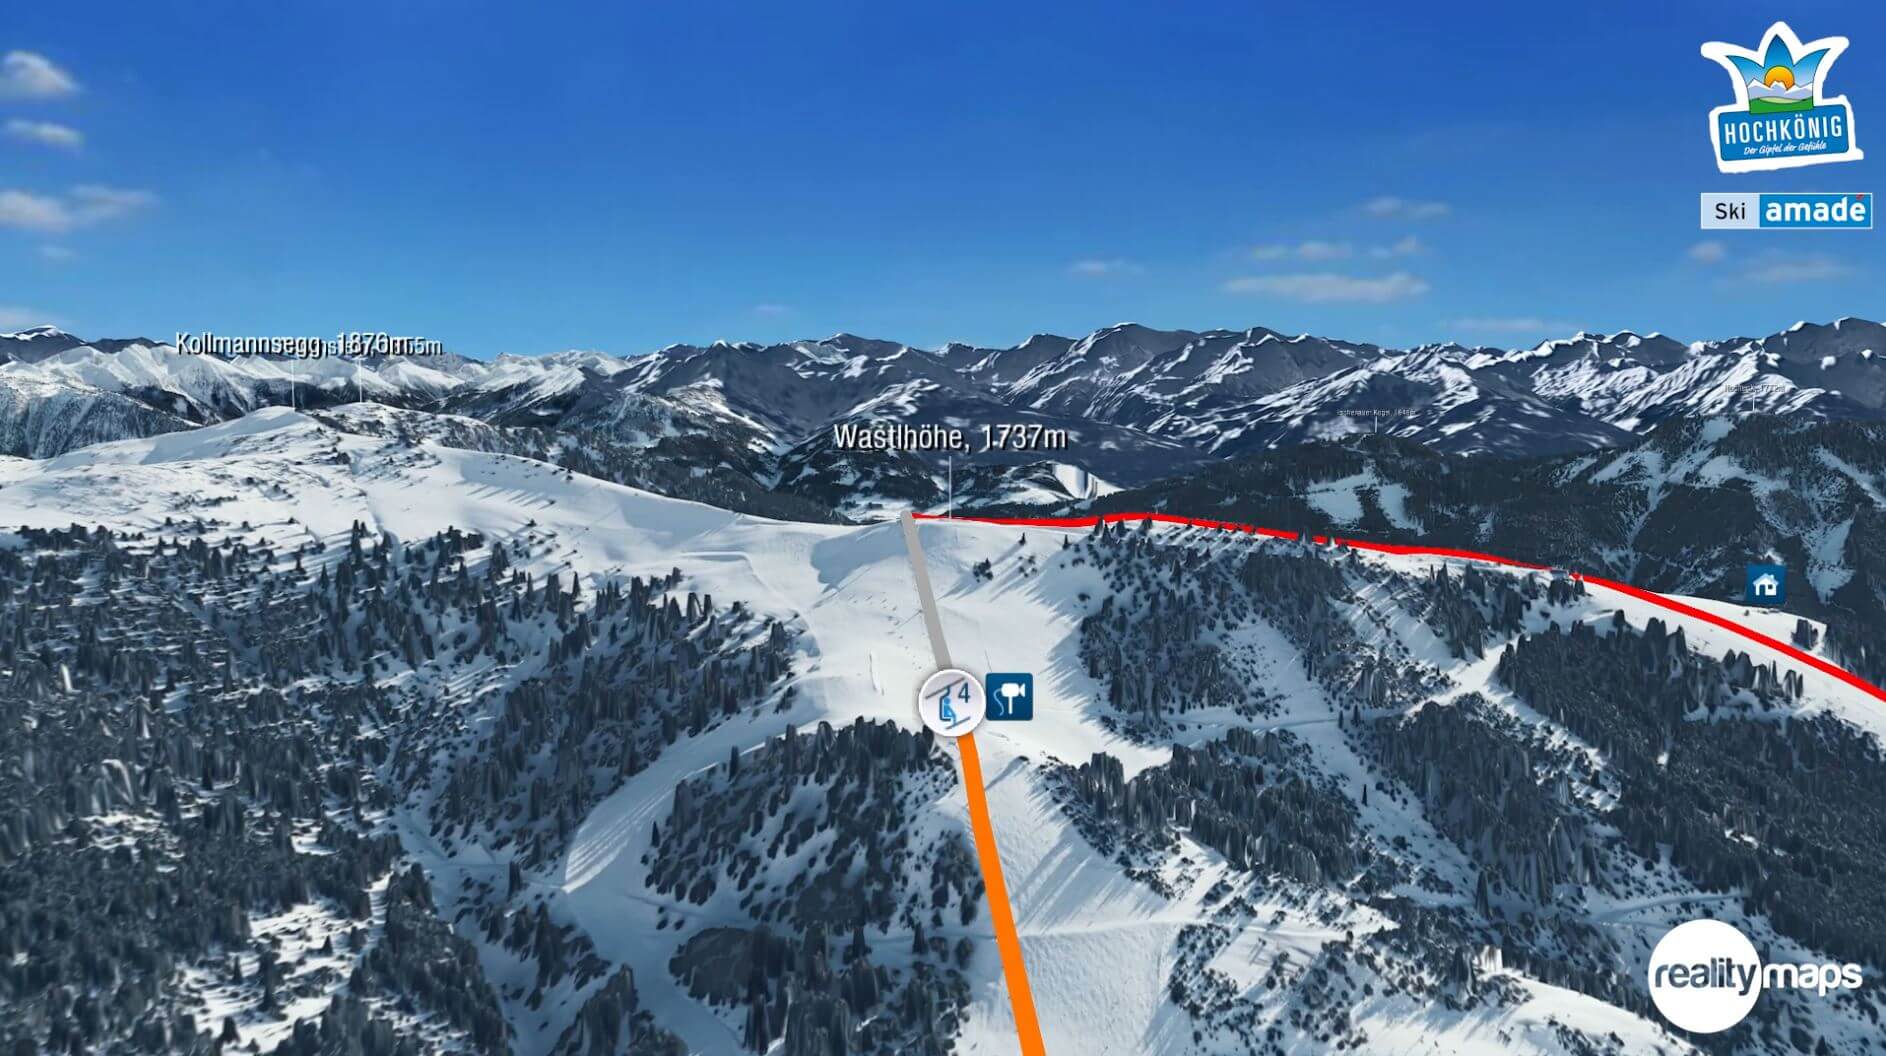 You are currently viewing 3D Animation Ski amadé Königstour